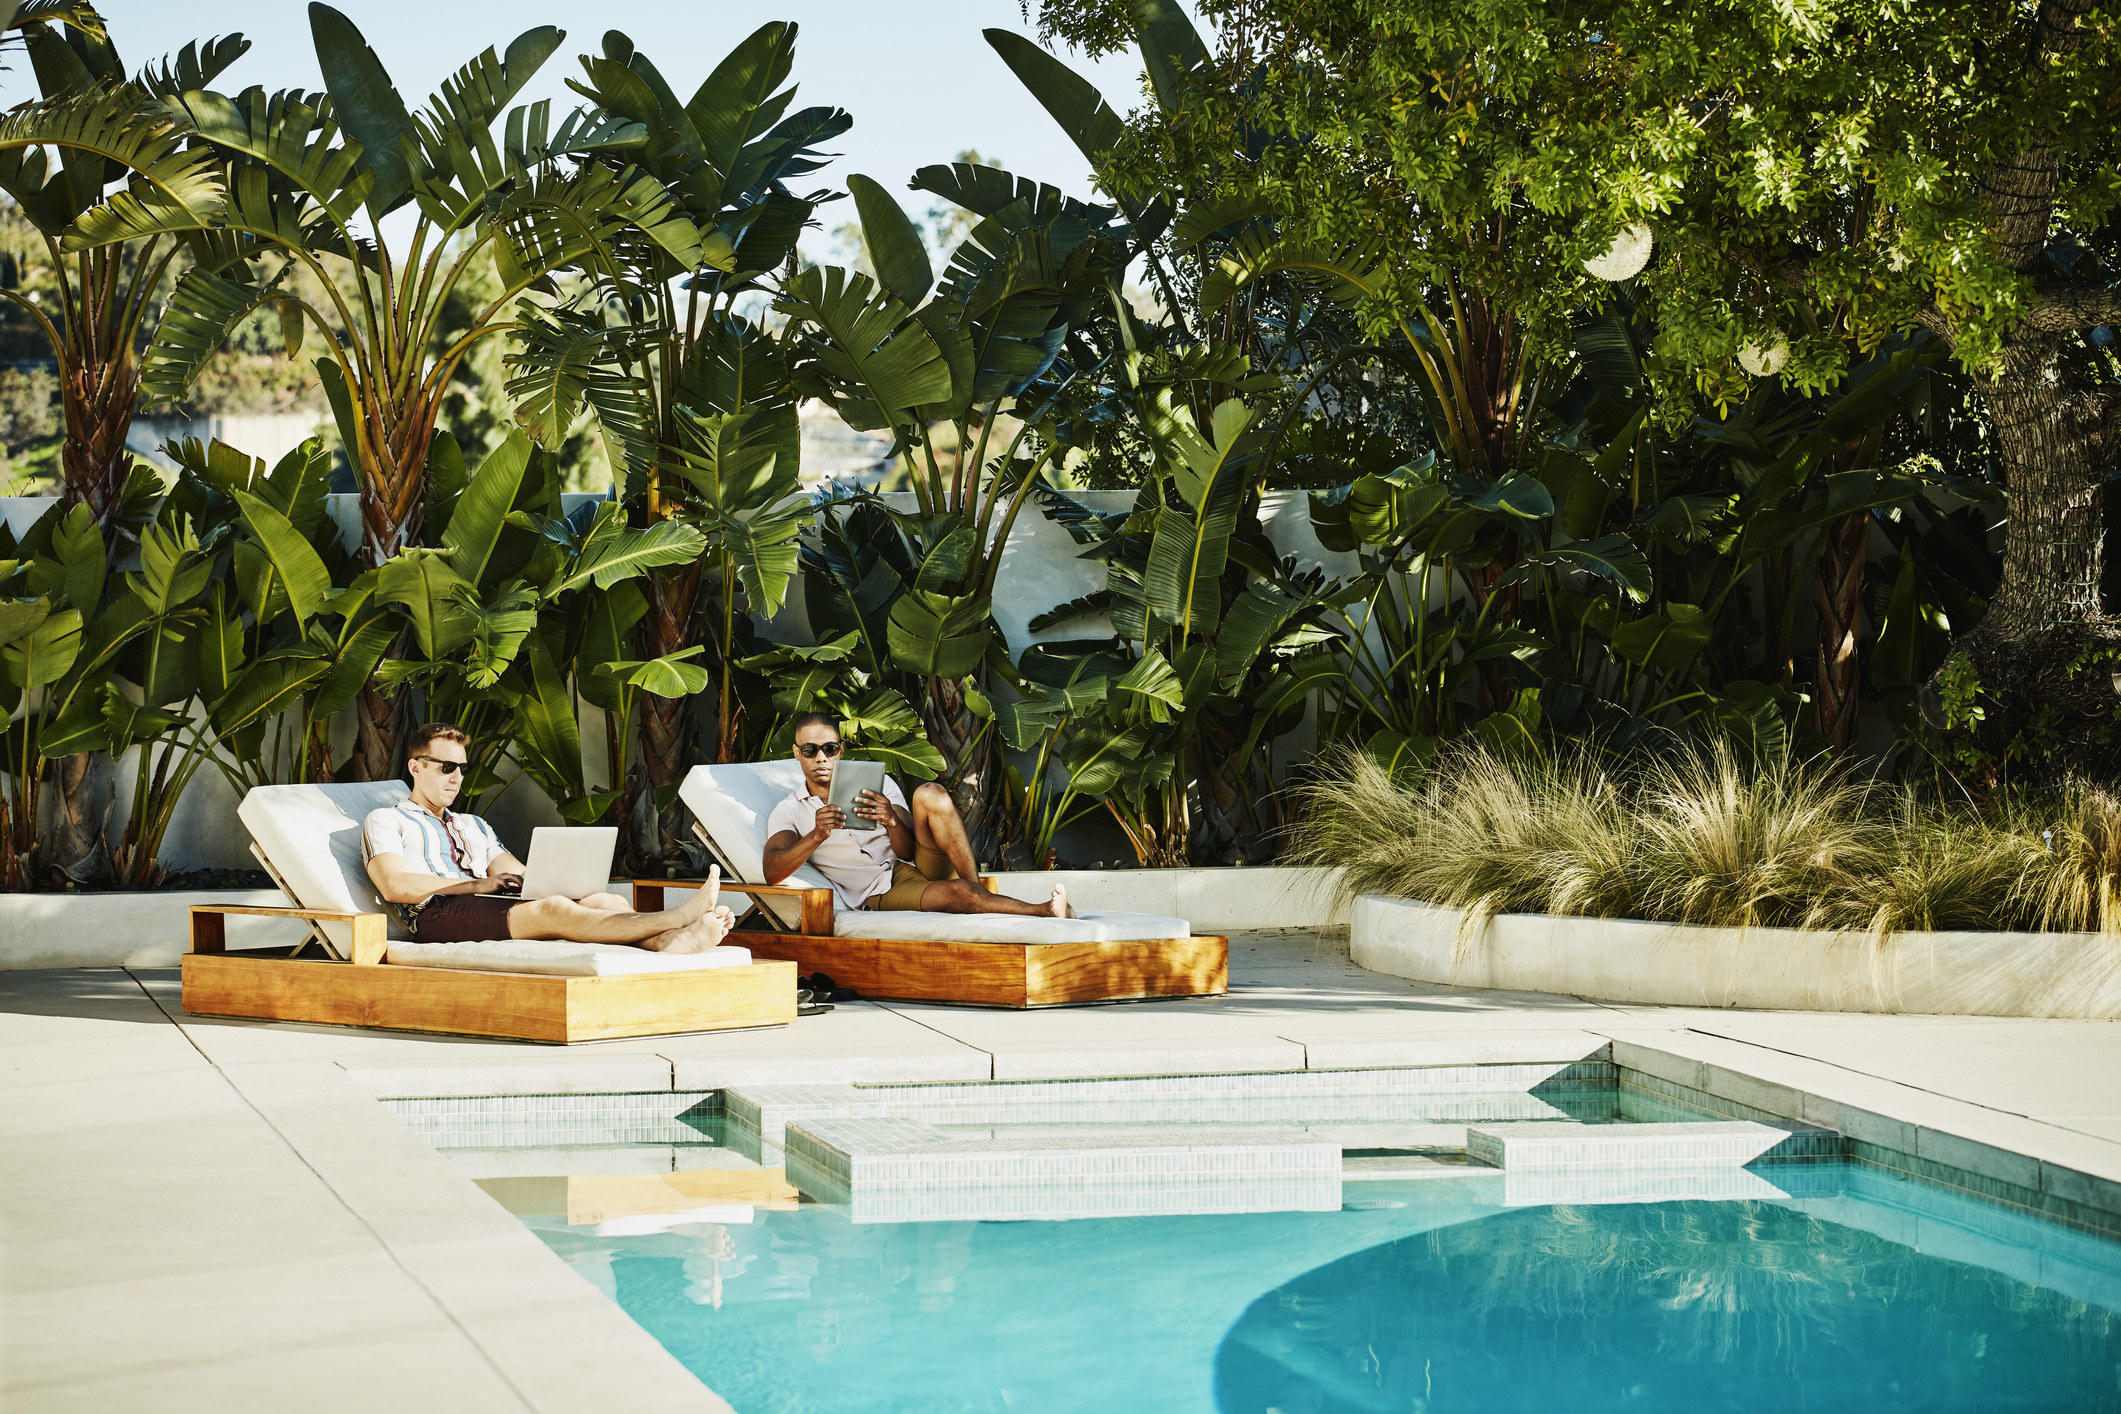 Two people lounging by a pool